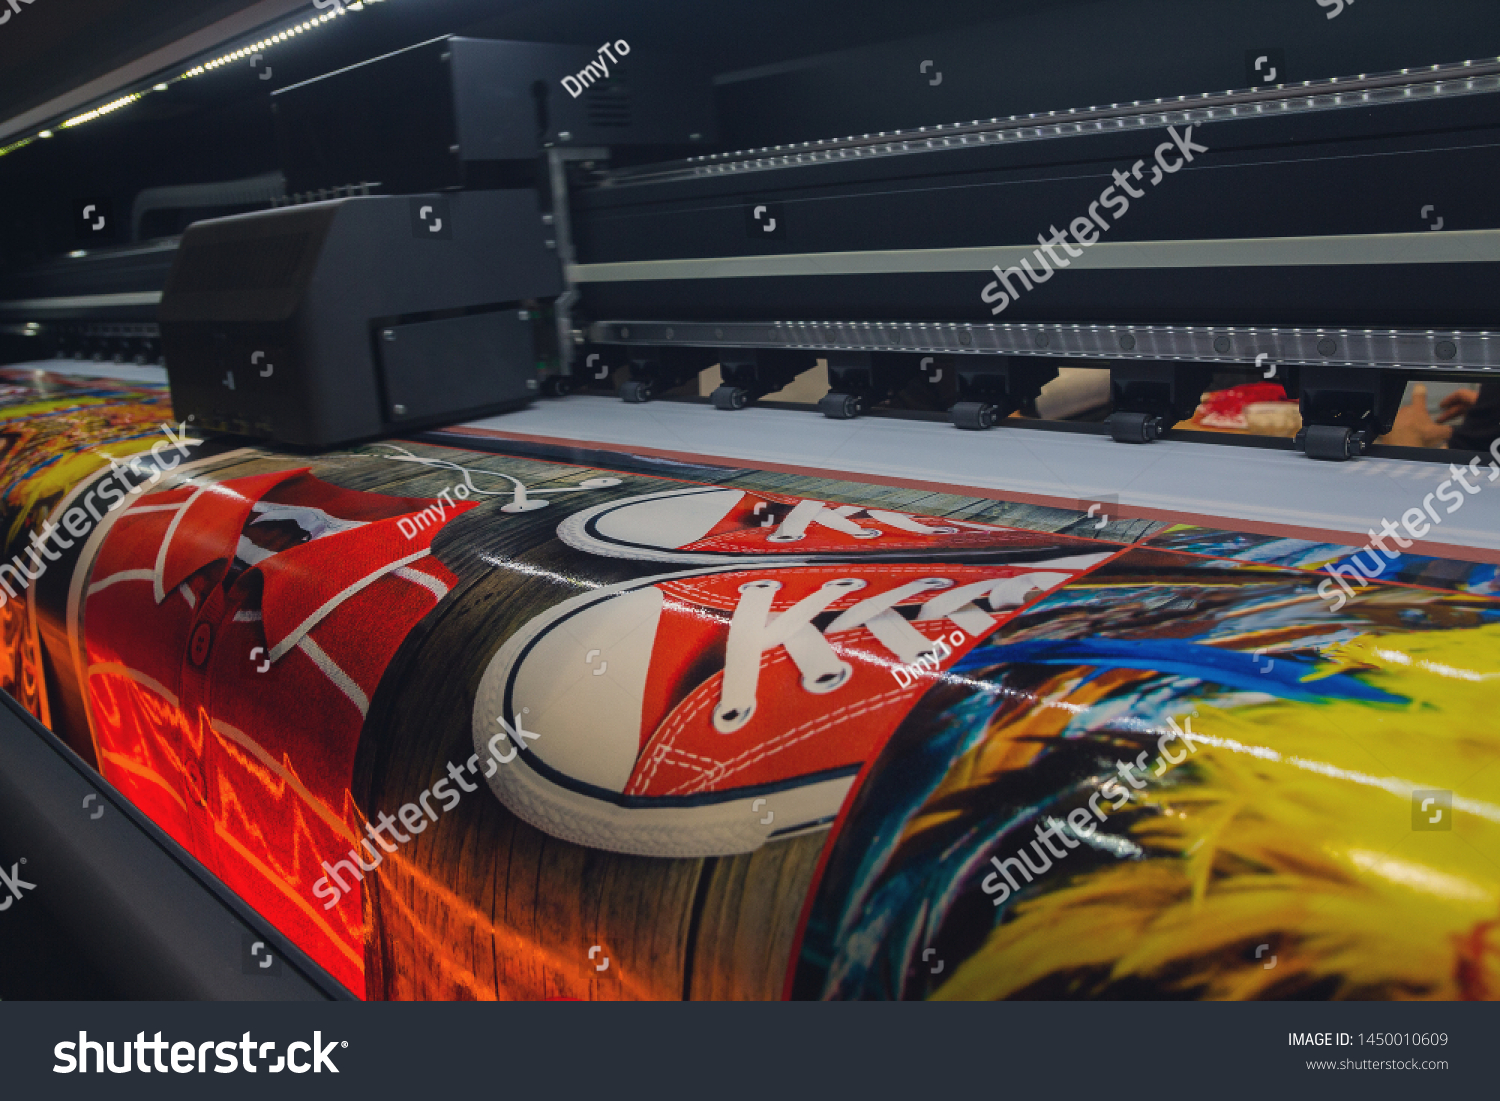 Large format printing machine in operation. Industry #1450010609